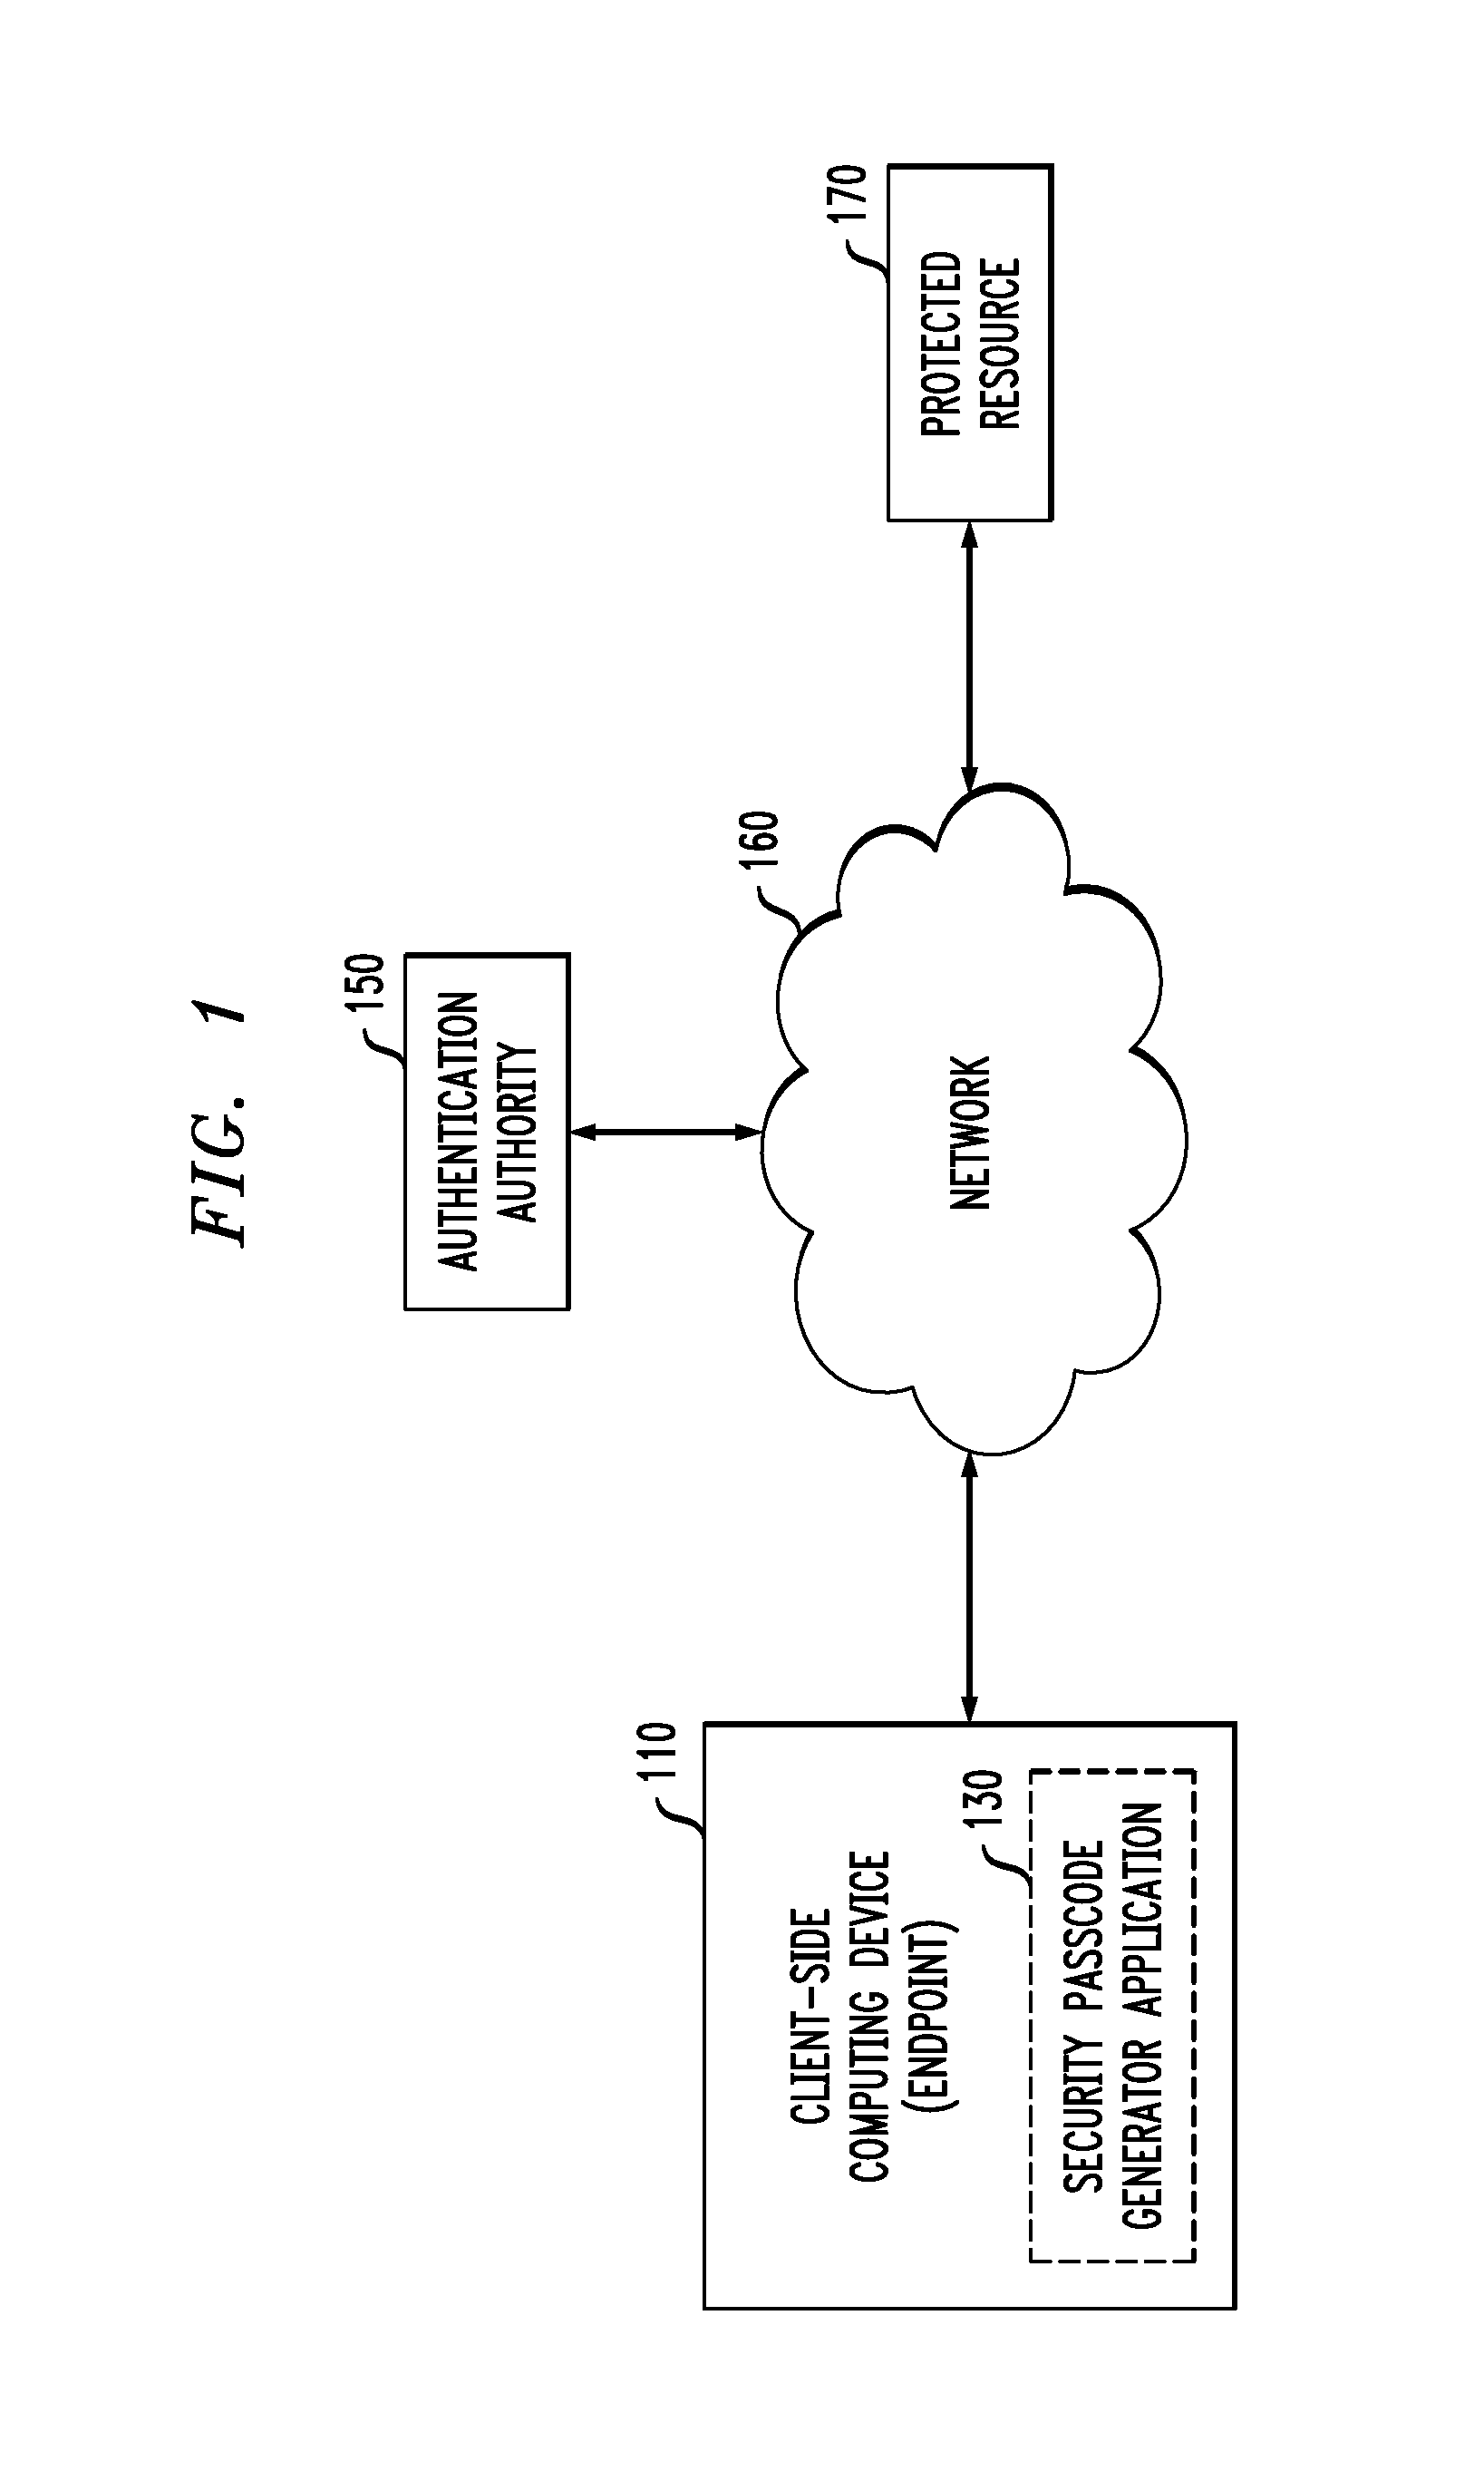 Event-based data signing via time-based one-time authentication passcodes